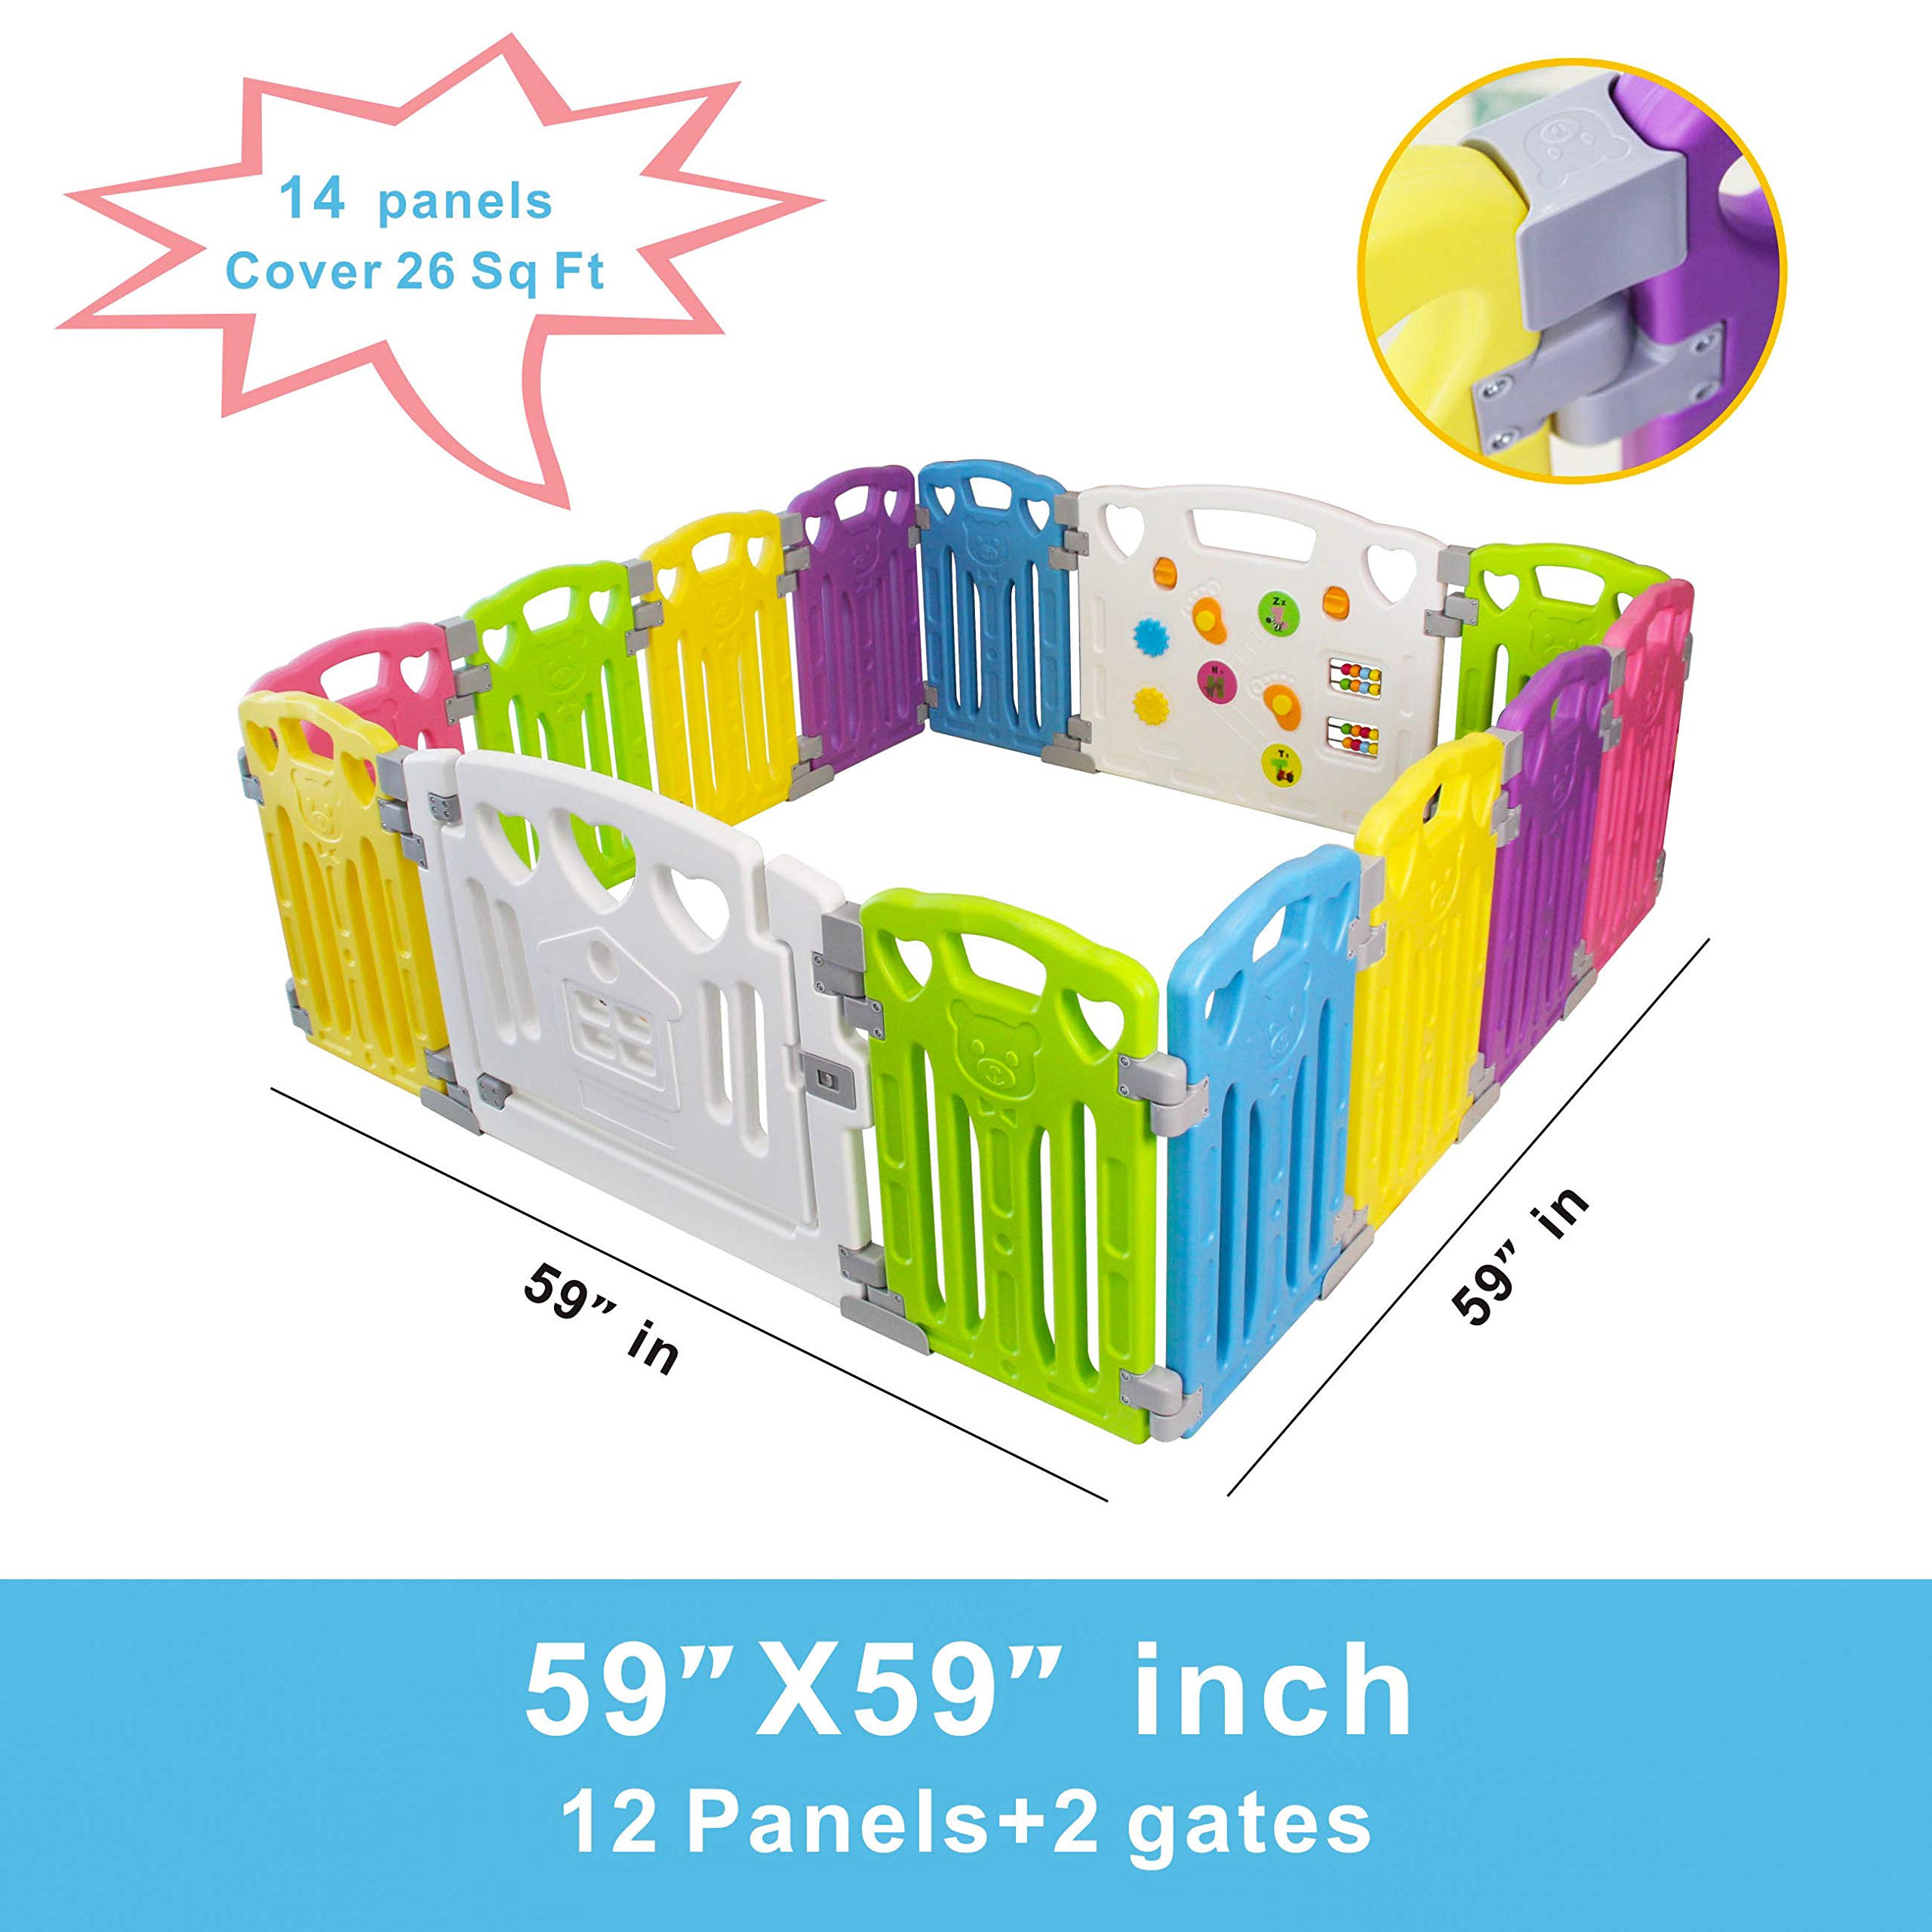 Baby Playpen Kids Activity Centre Safety Play Yard Home Indoor Outdoor New Pen (Multicolour, Classic Set 14 Panel)